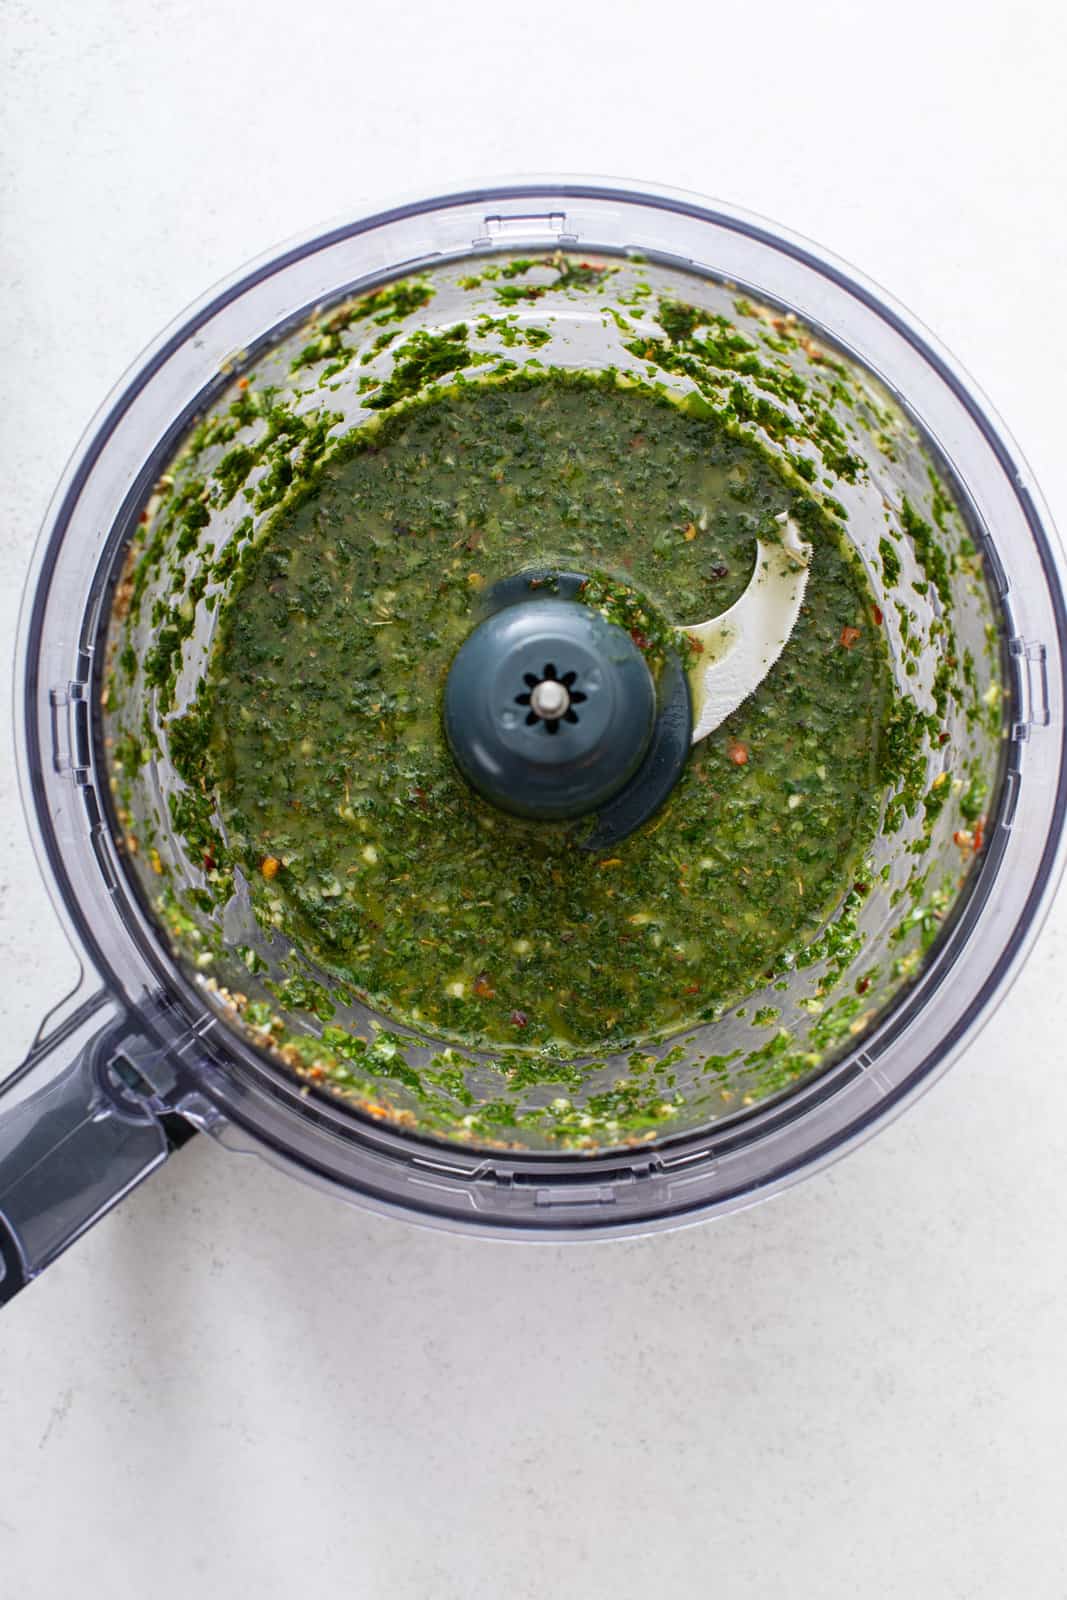 Processed mint chimichurri in the bowl of a food processor.